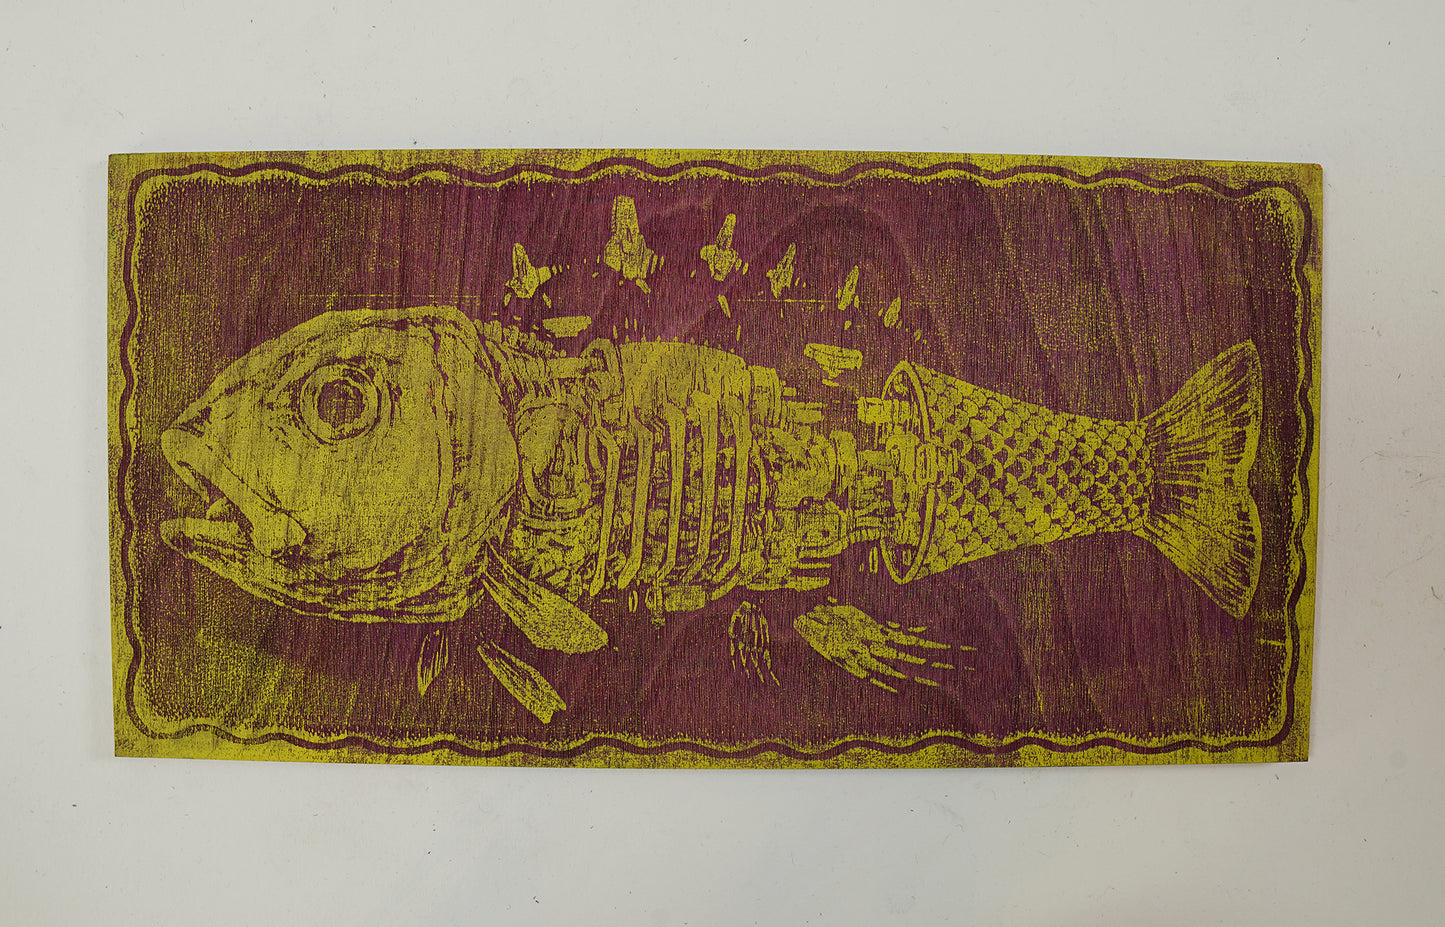 Mechanical Fish - Laser Etched Wood